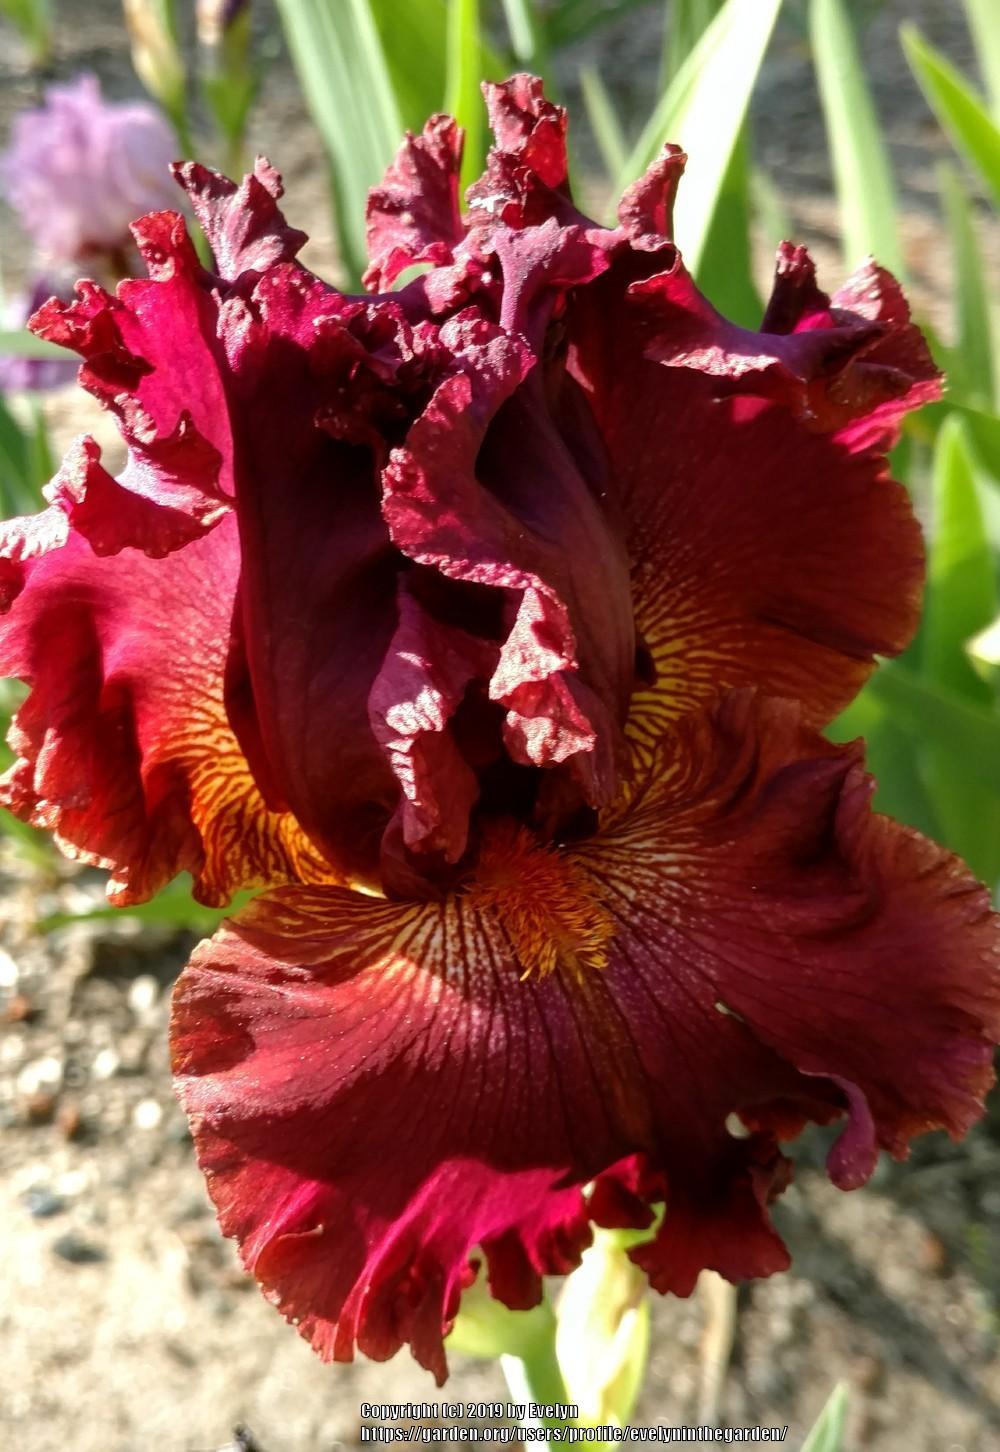 Photo of Tall Bearded Iris (Iris 'Ready for My Closeup') uploaded by evelyninthegarden